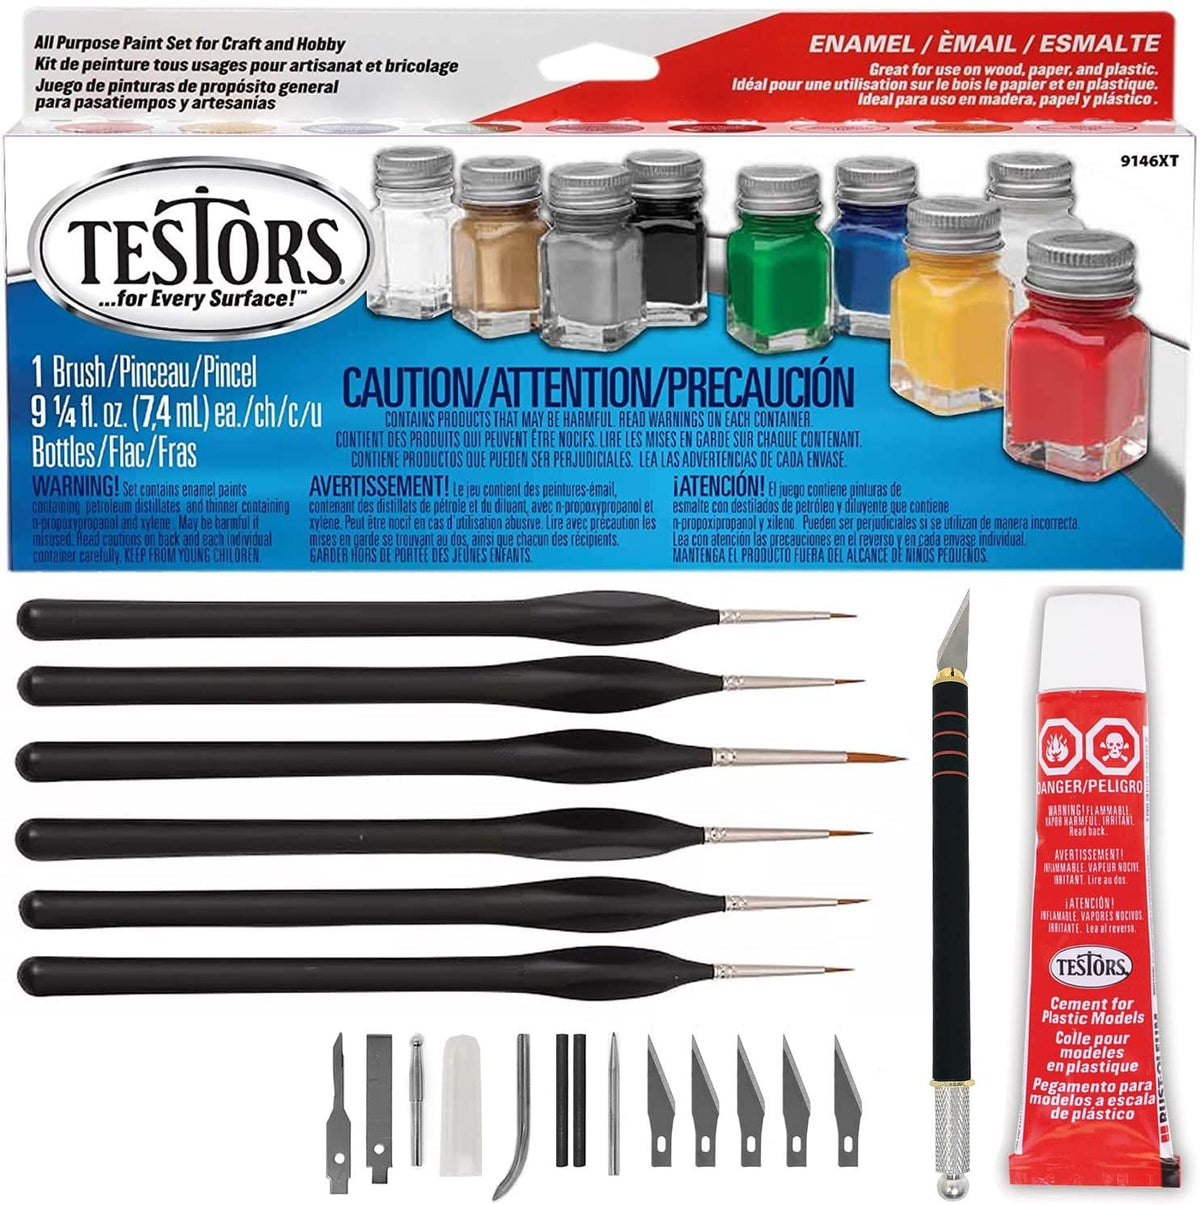 Testors Cement Plastic Model Glue Adhesive 2-Pack, 6 Fine Detail Miniatures  Paint Brushes, Precision Crafting Knife with Extra Blades and Tips 